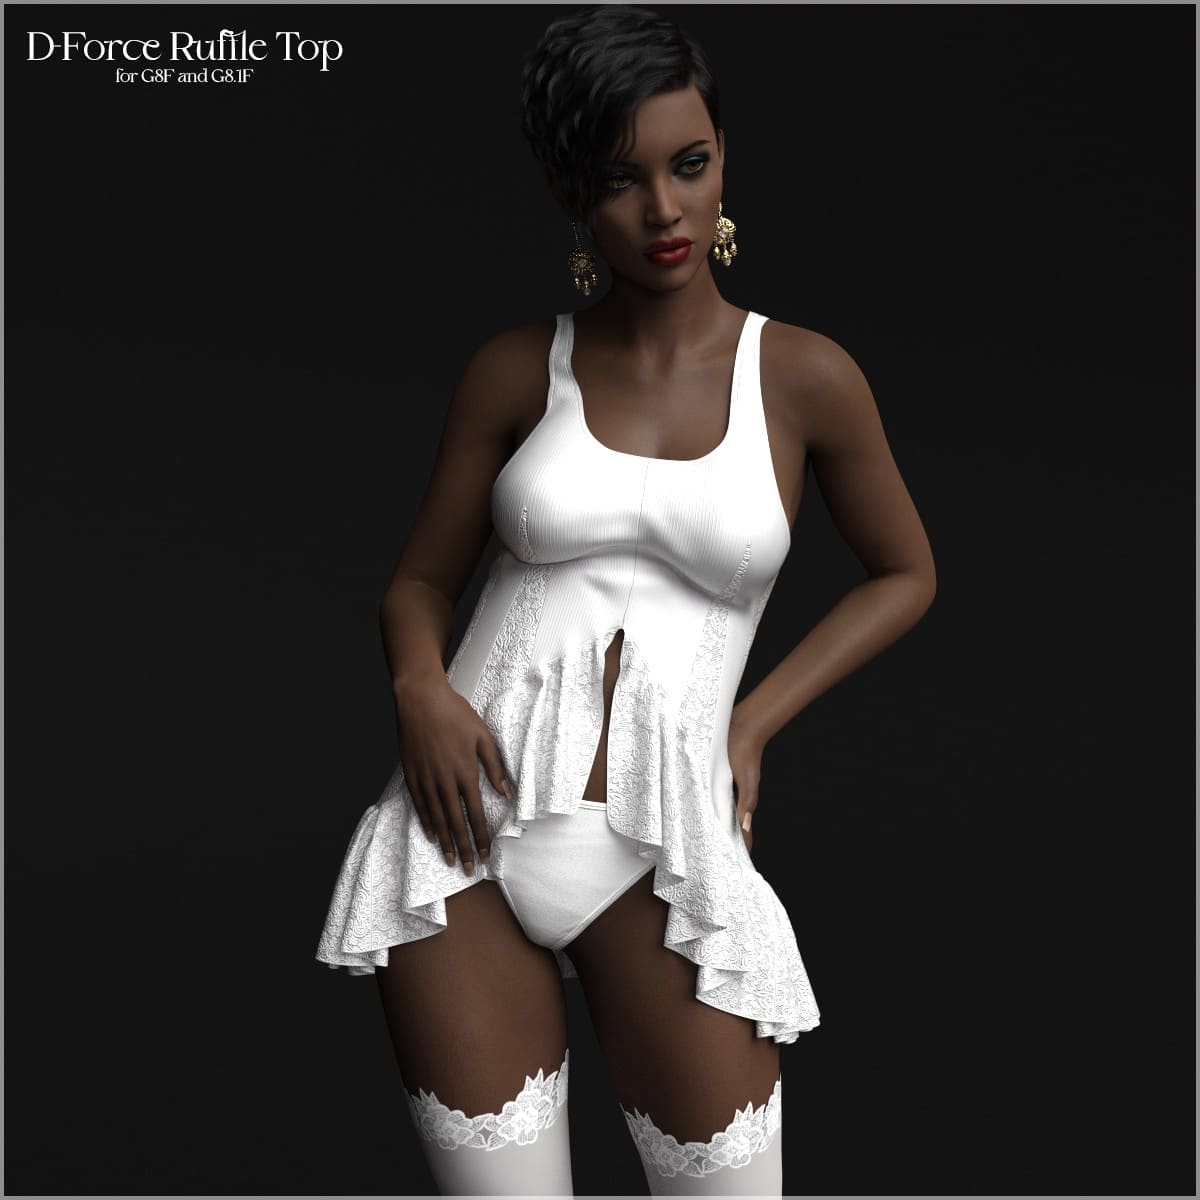 D-Force Ruffle Top for G8F and G8.1F_DAZ3DDL